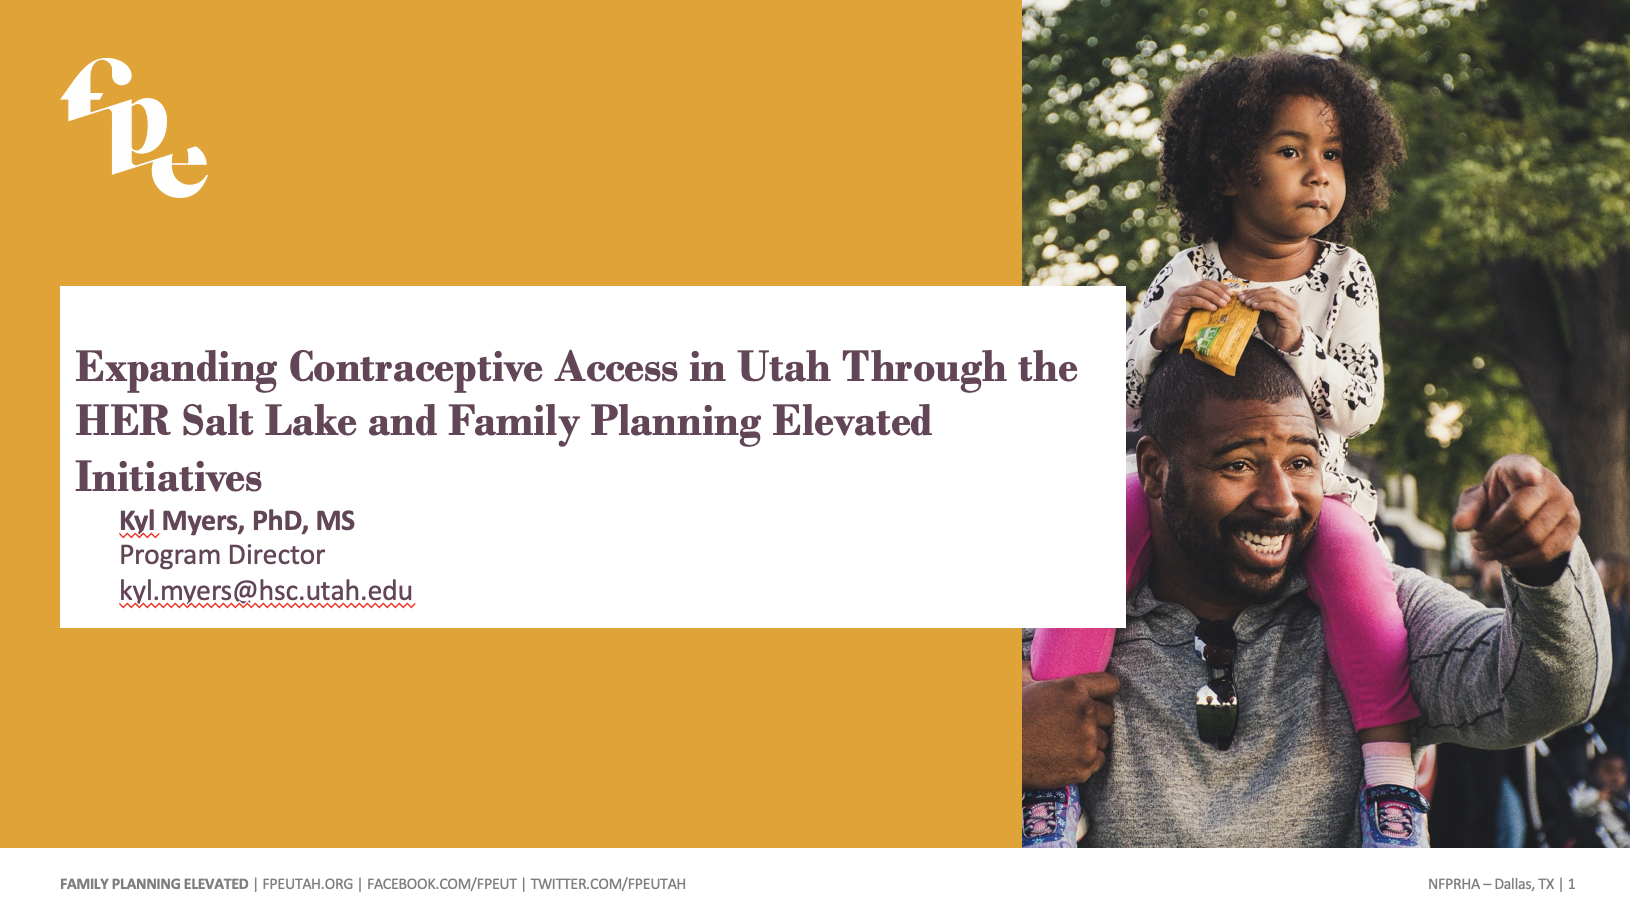 Dr. Kyl Myers | Expanding Contraceptive Access in Utah Through the HER Salt Lake and Family Planning Elevated | Dec 2019